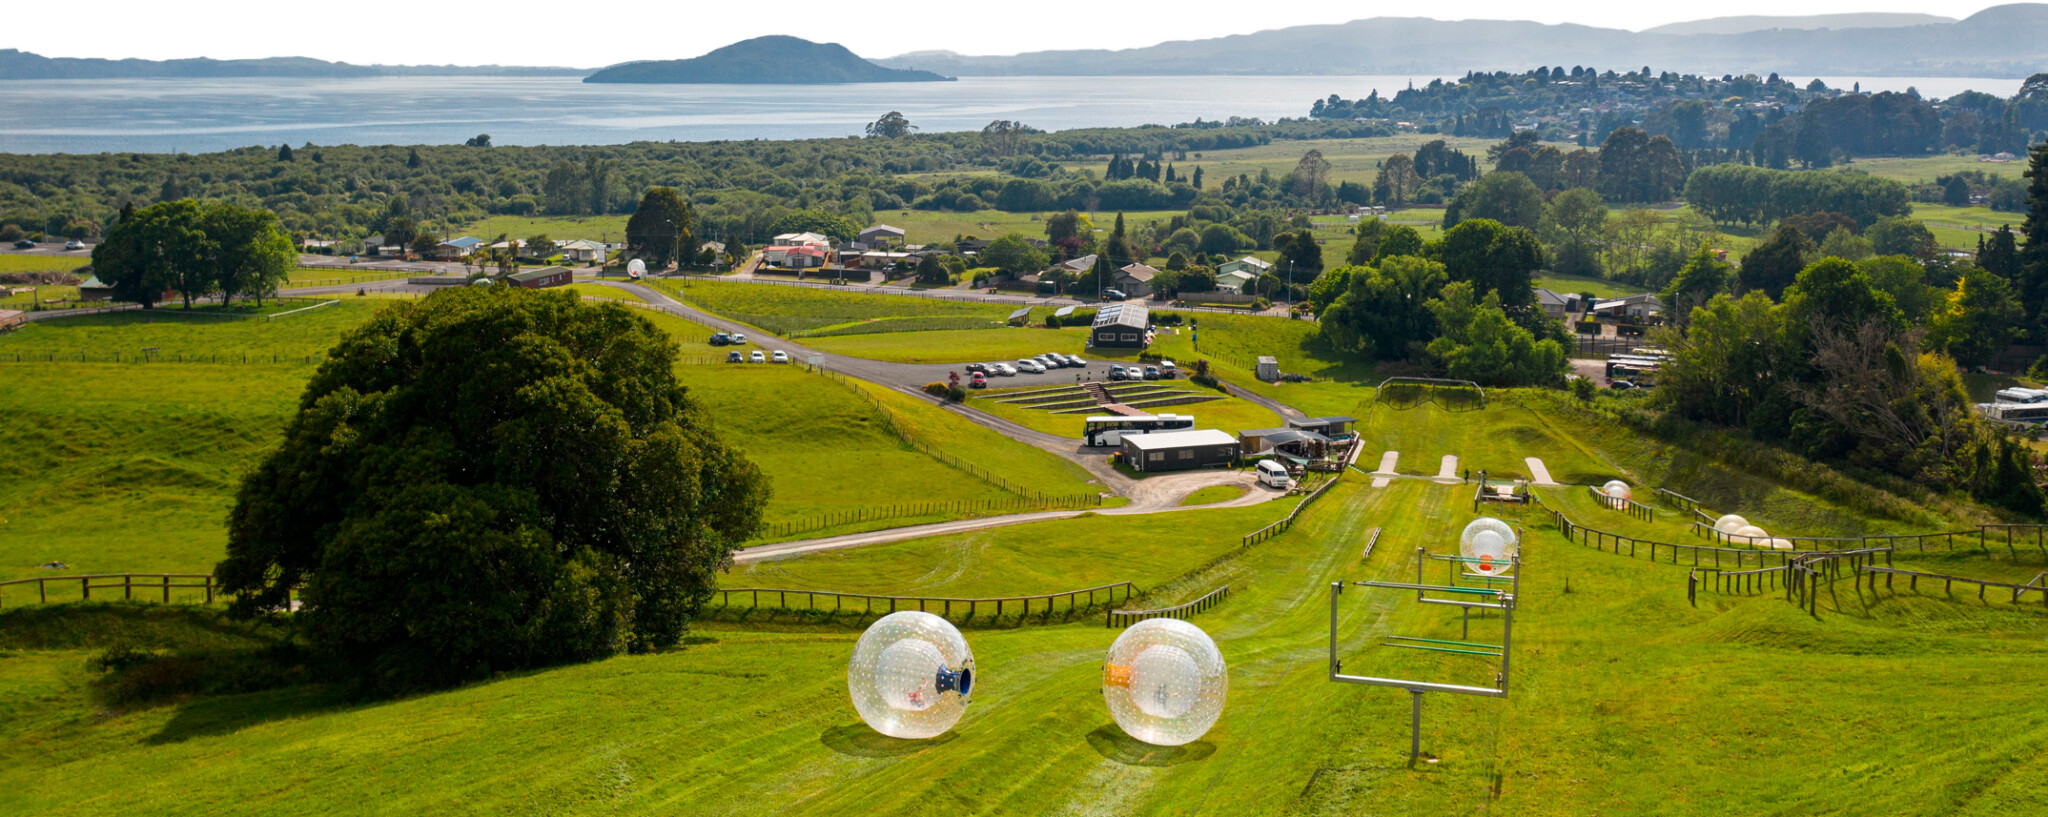 Explore Rotorua – One Kiwi Owned And Operated Experience At A Time